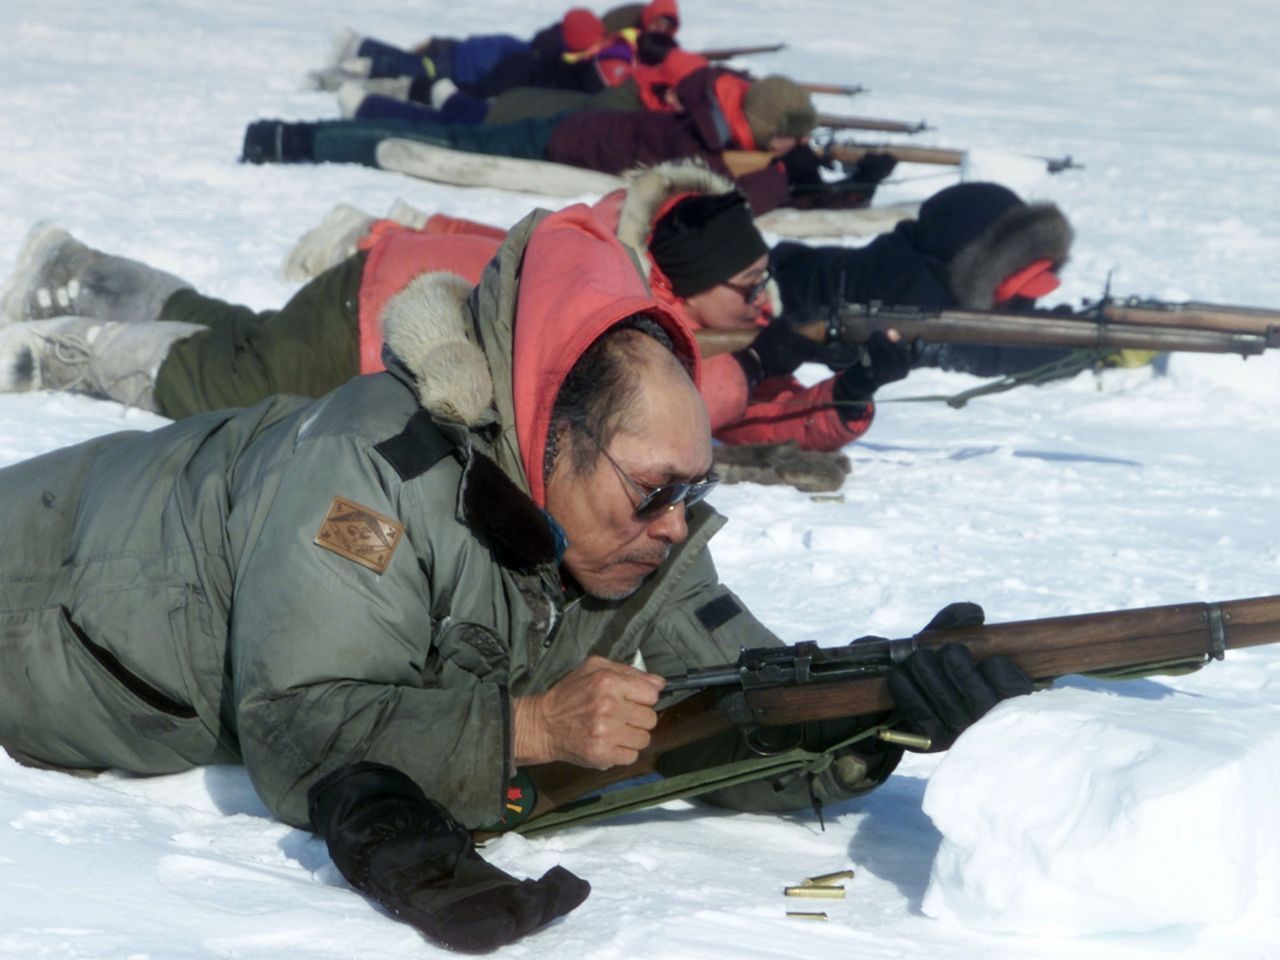 5,000 Lee Enfield rifles to be gifted to Canadian Rangers, 9,500